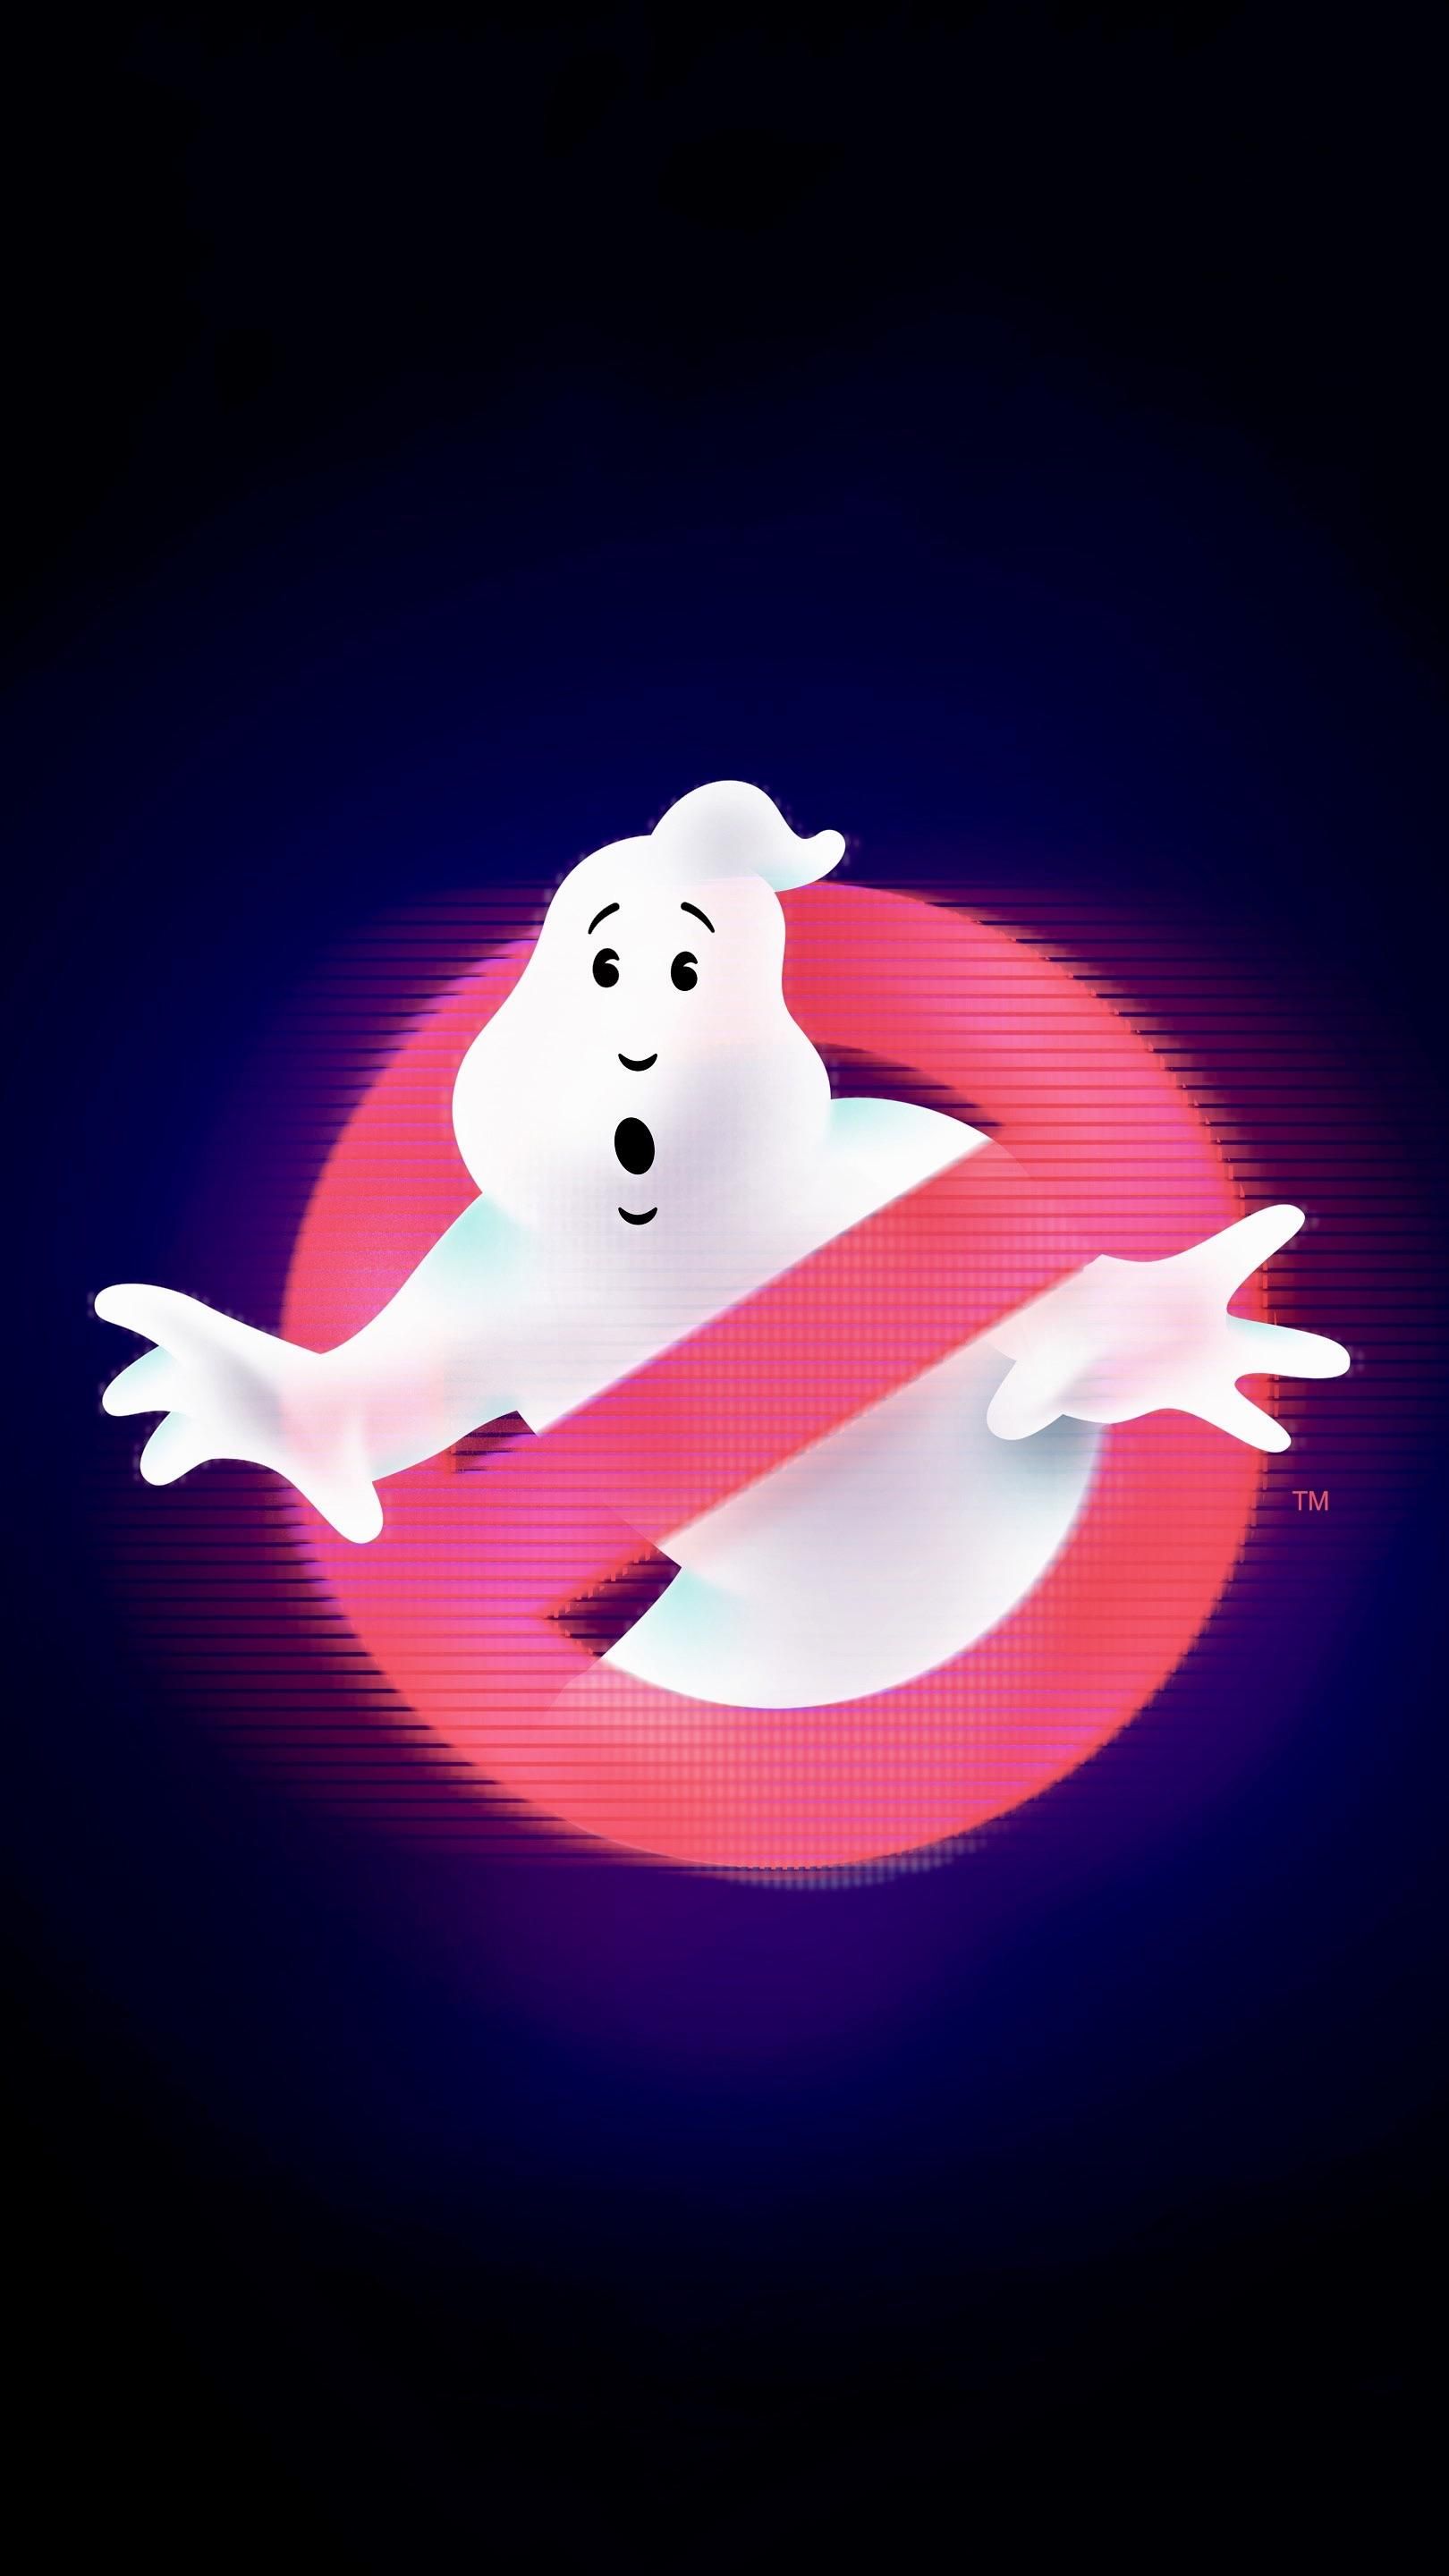 Ghostbusters wallpaper by AGOW  Download on ZEDGE  8519